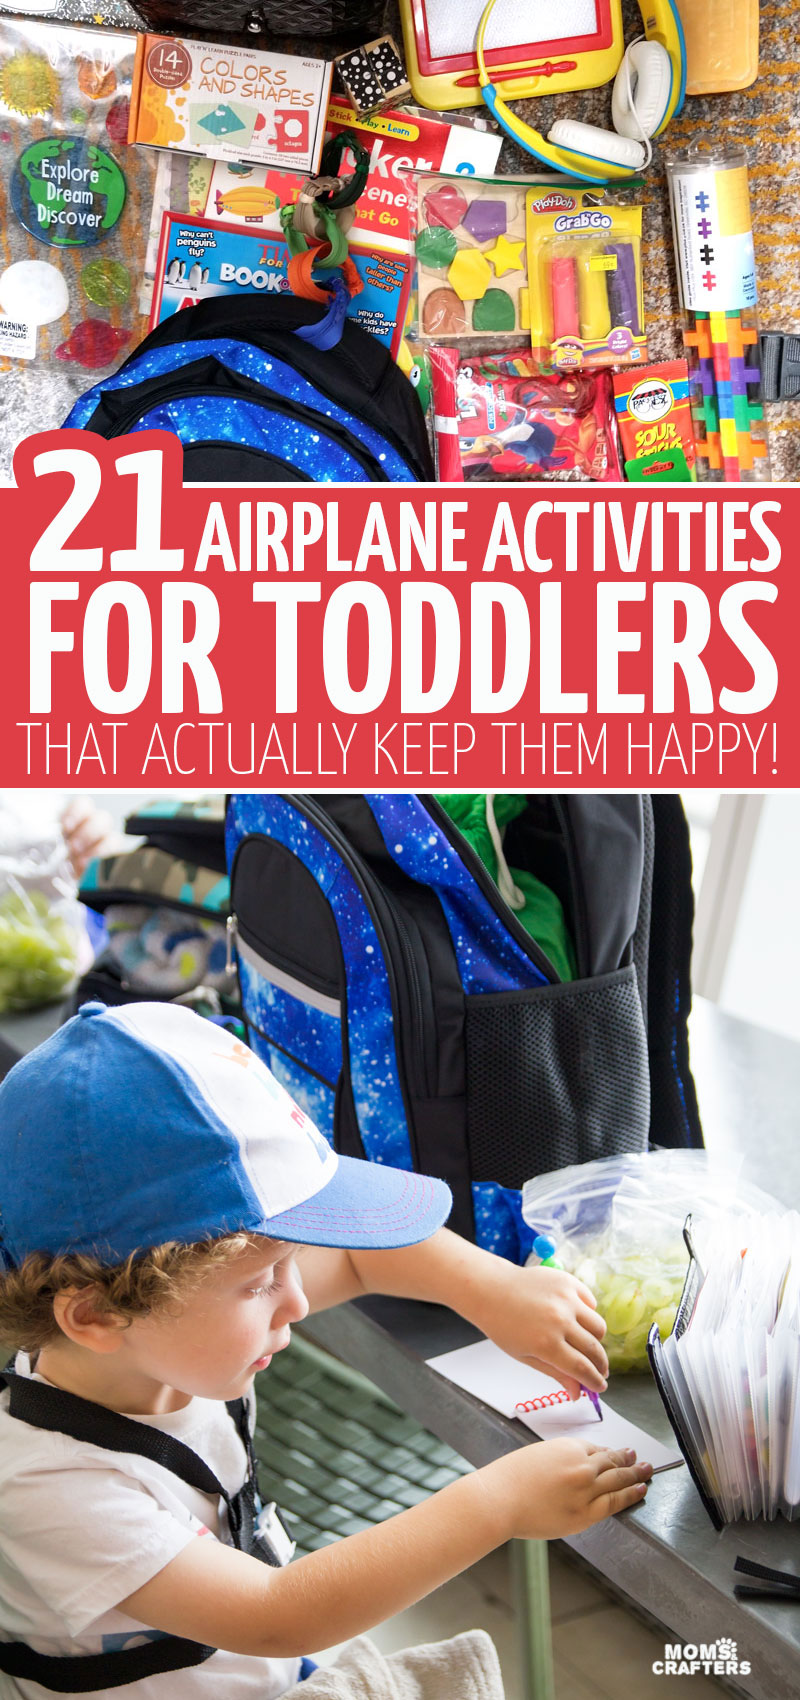 airplane ideas for 2 year old